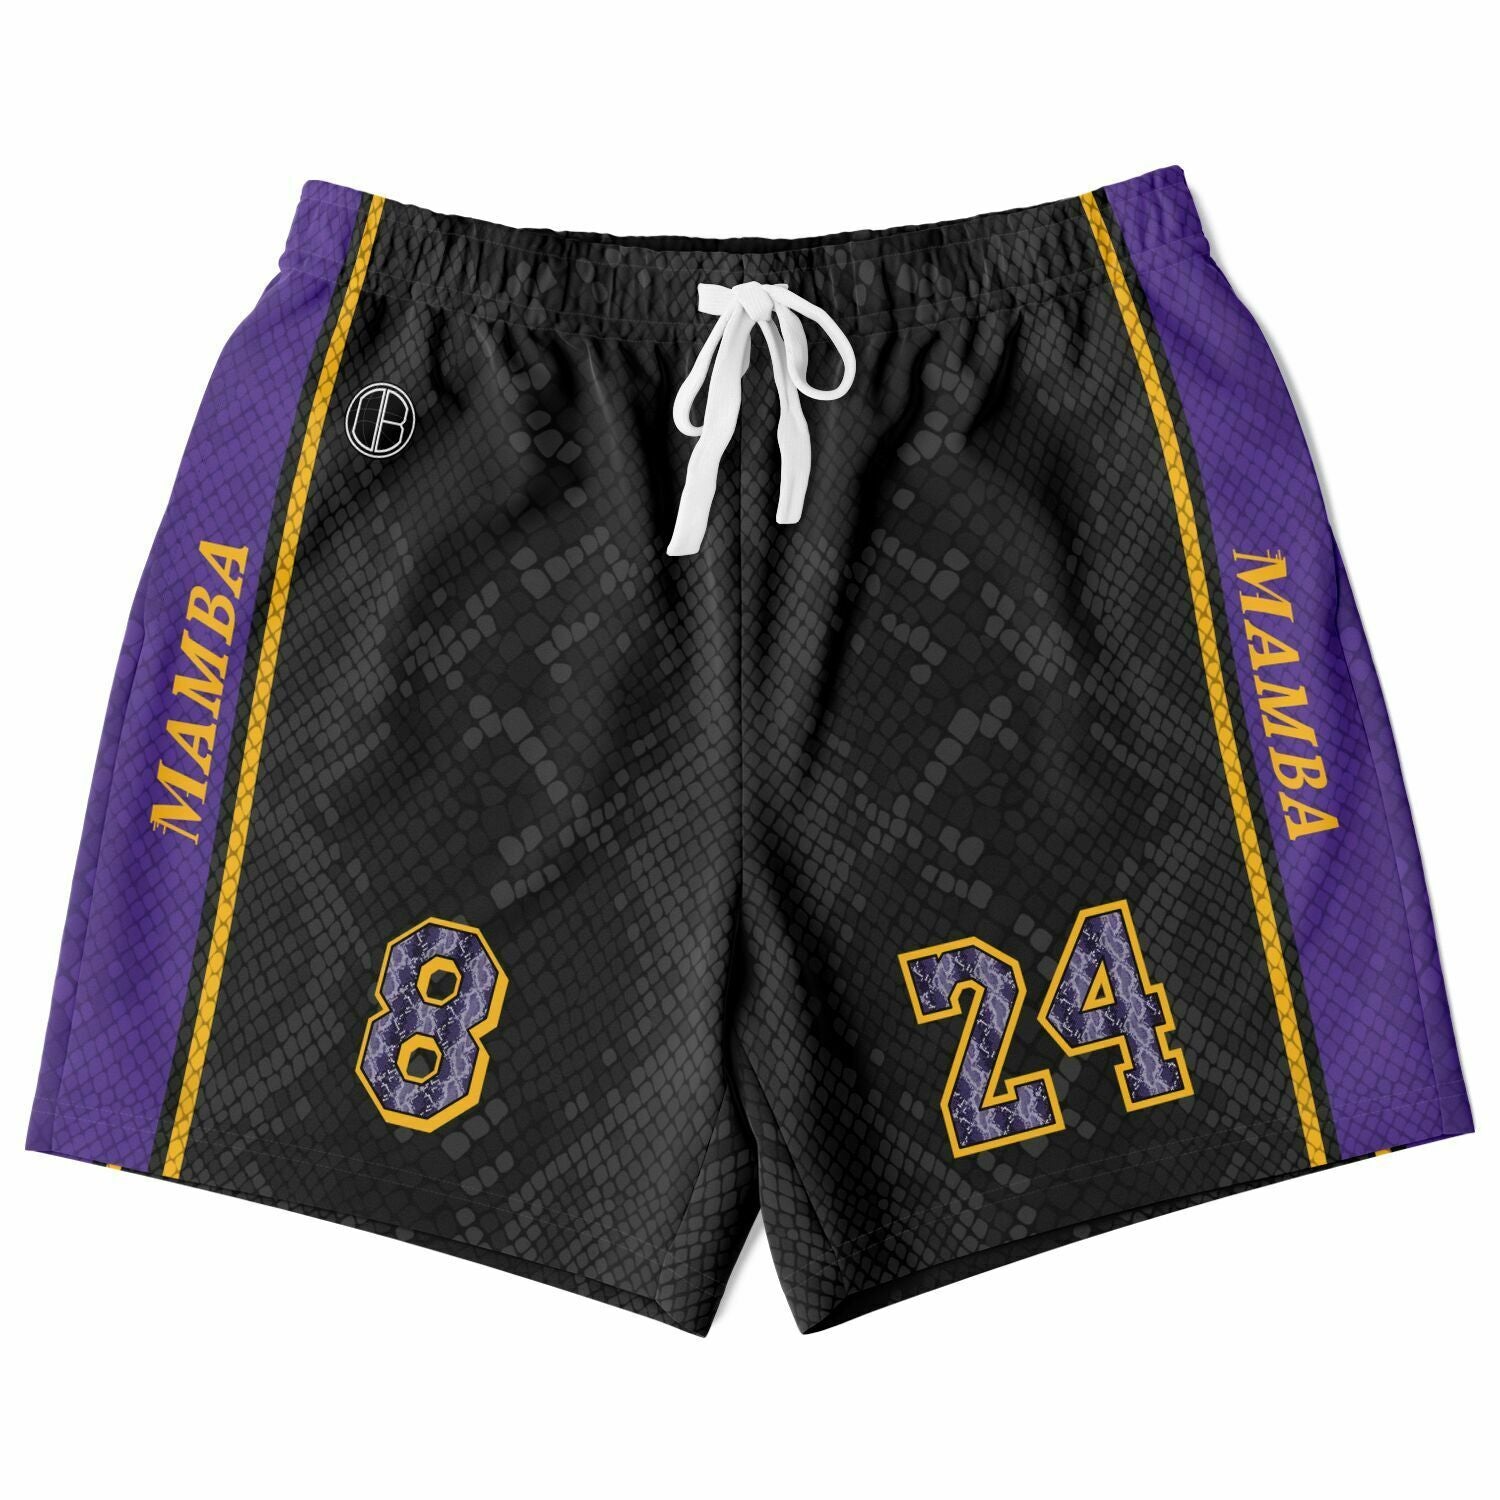 DEARBBALL SHORTS MESH LOS ANGELES - LA 24 8 INFINITY LIMITED